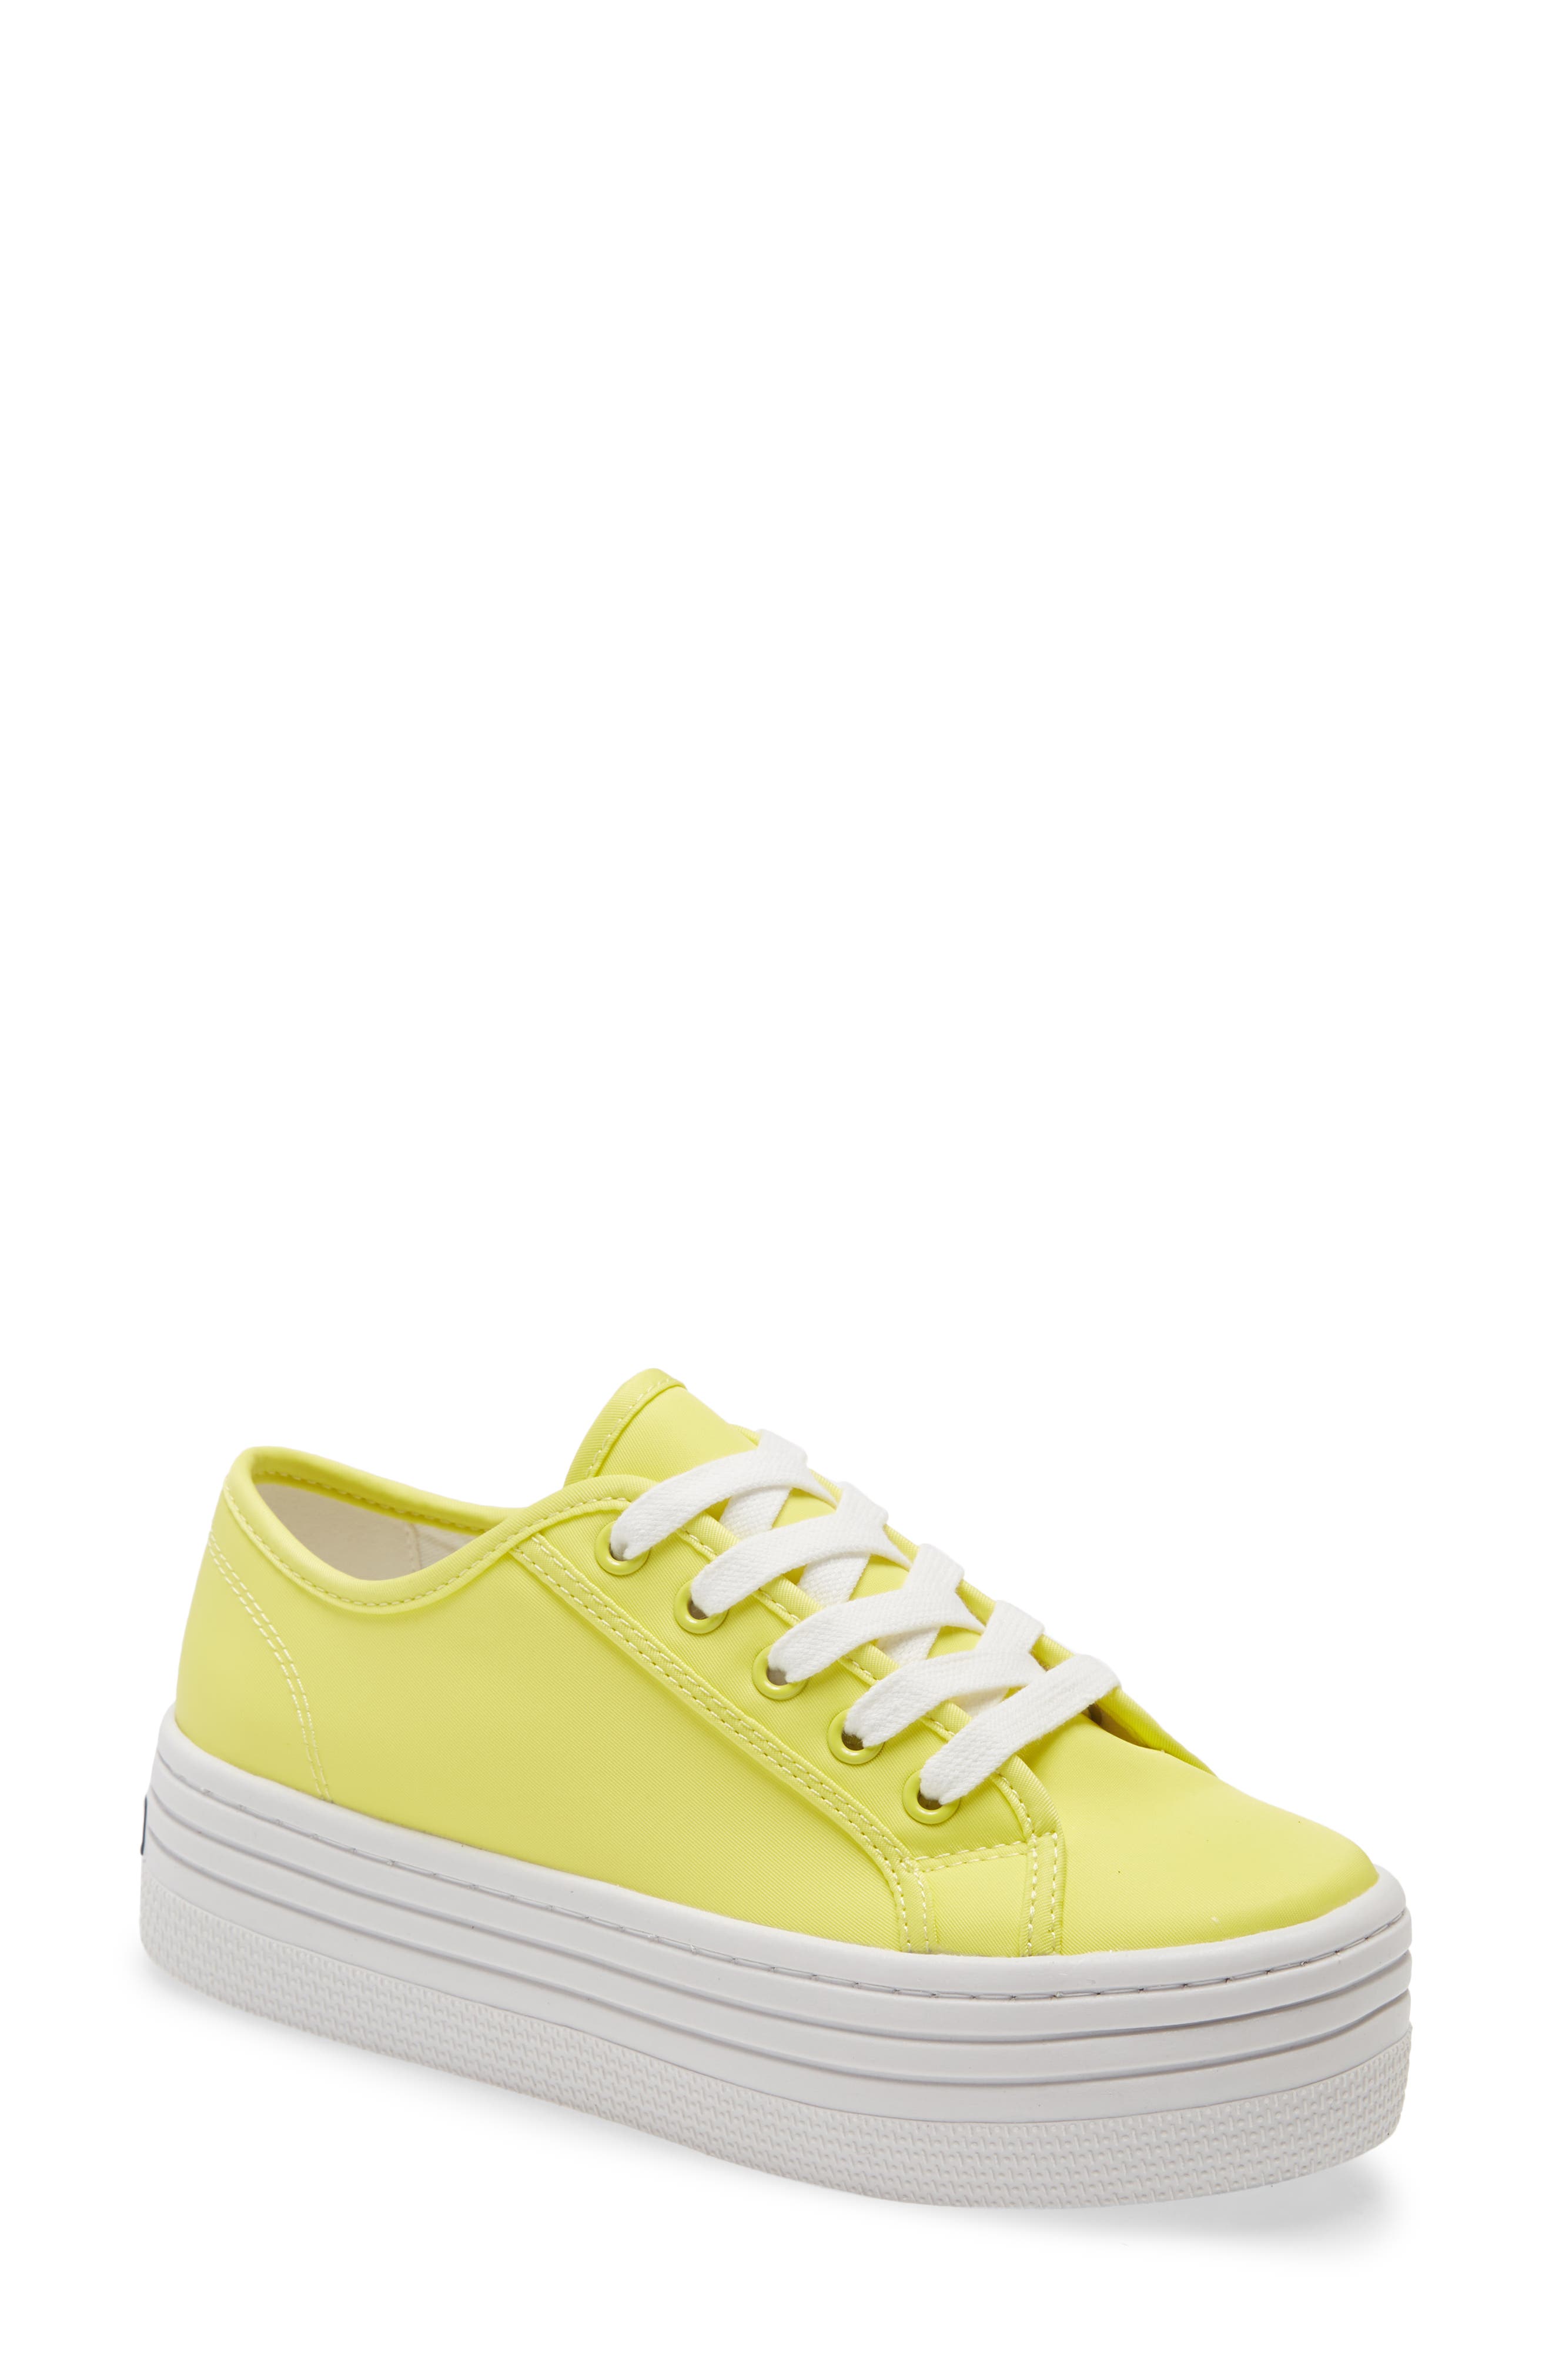 yellow shoes for women